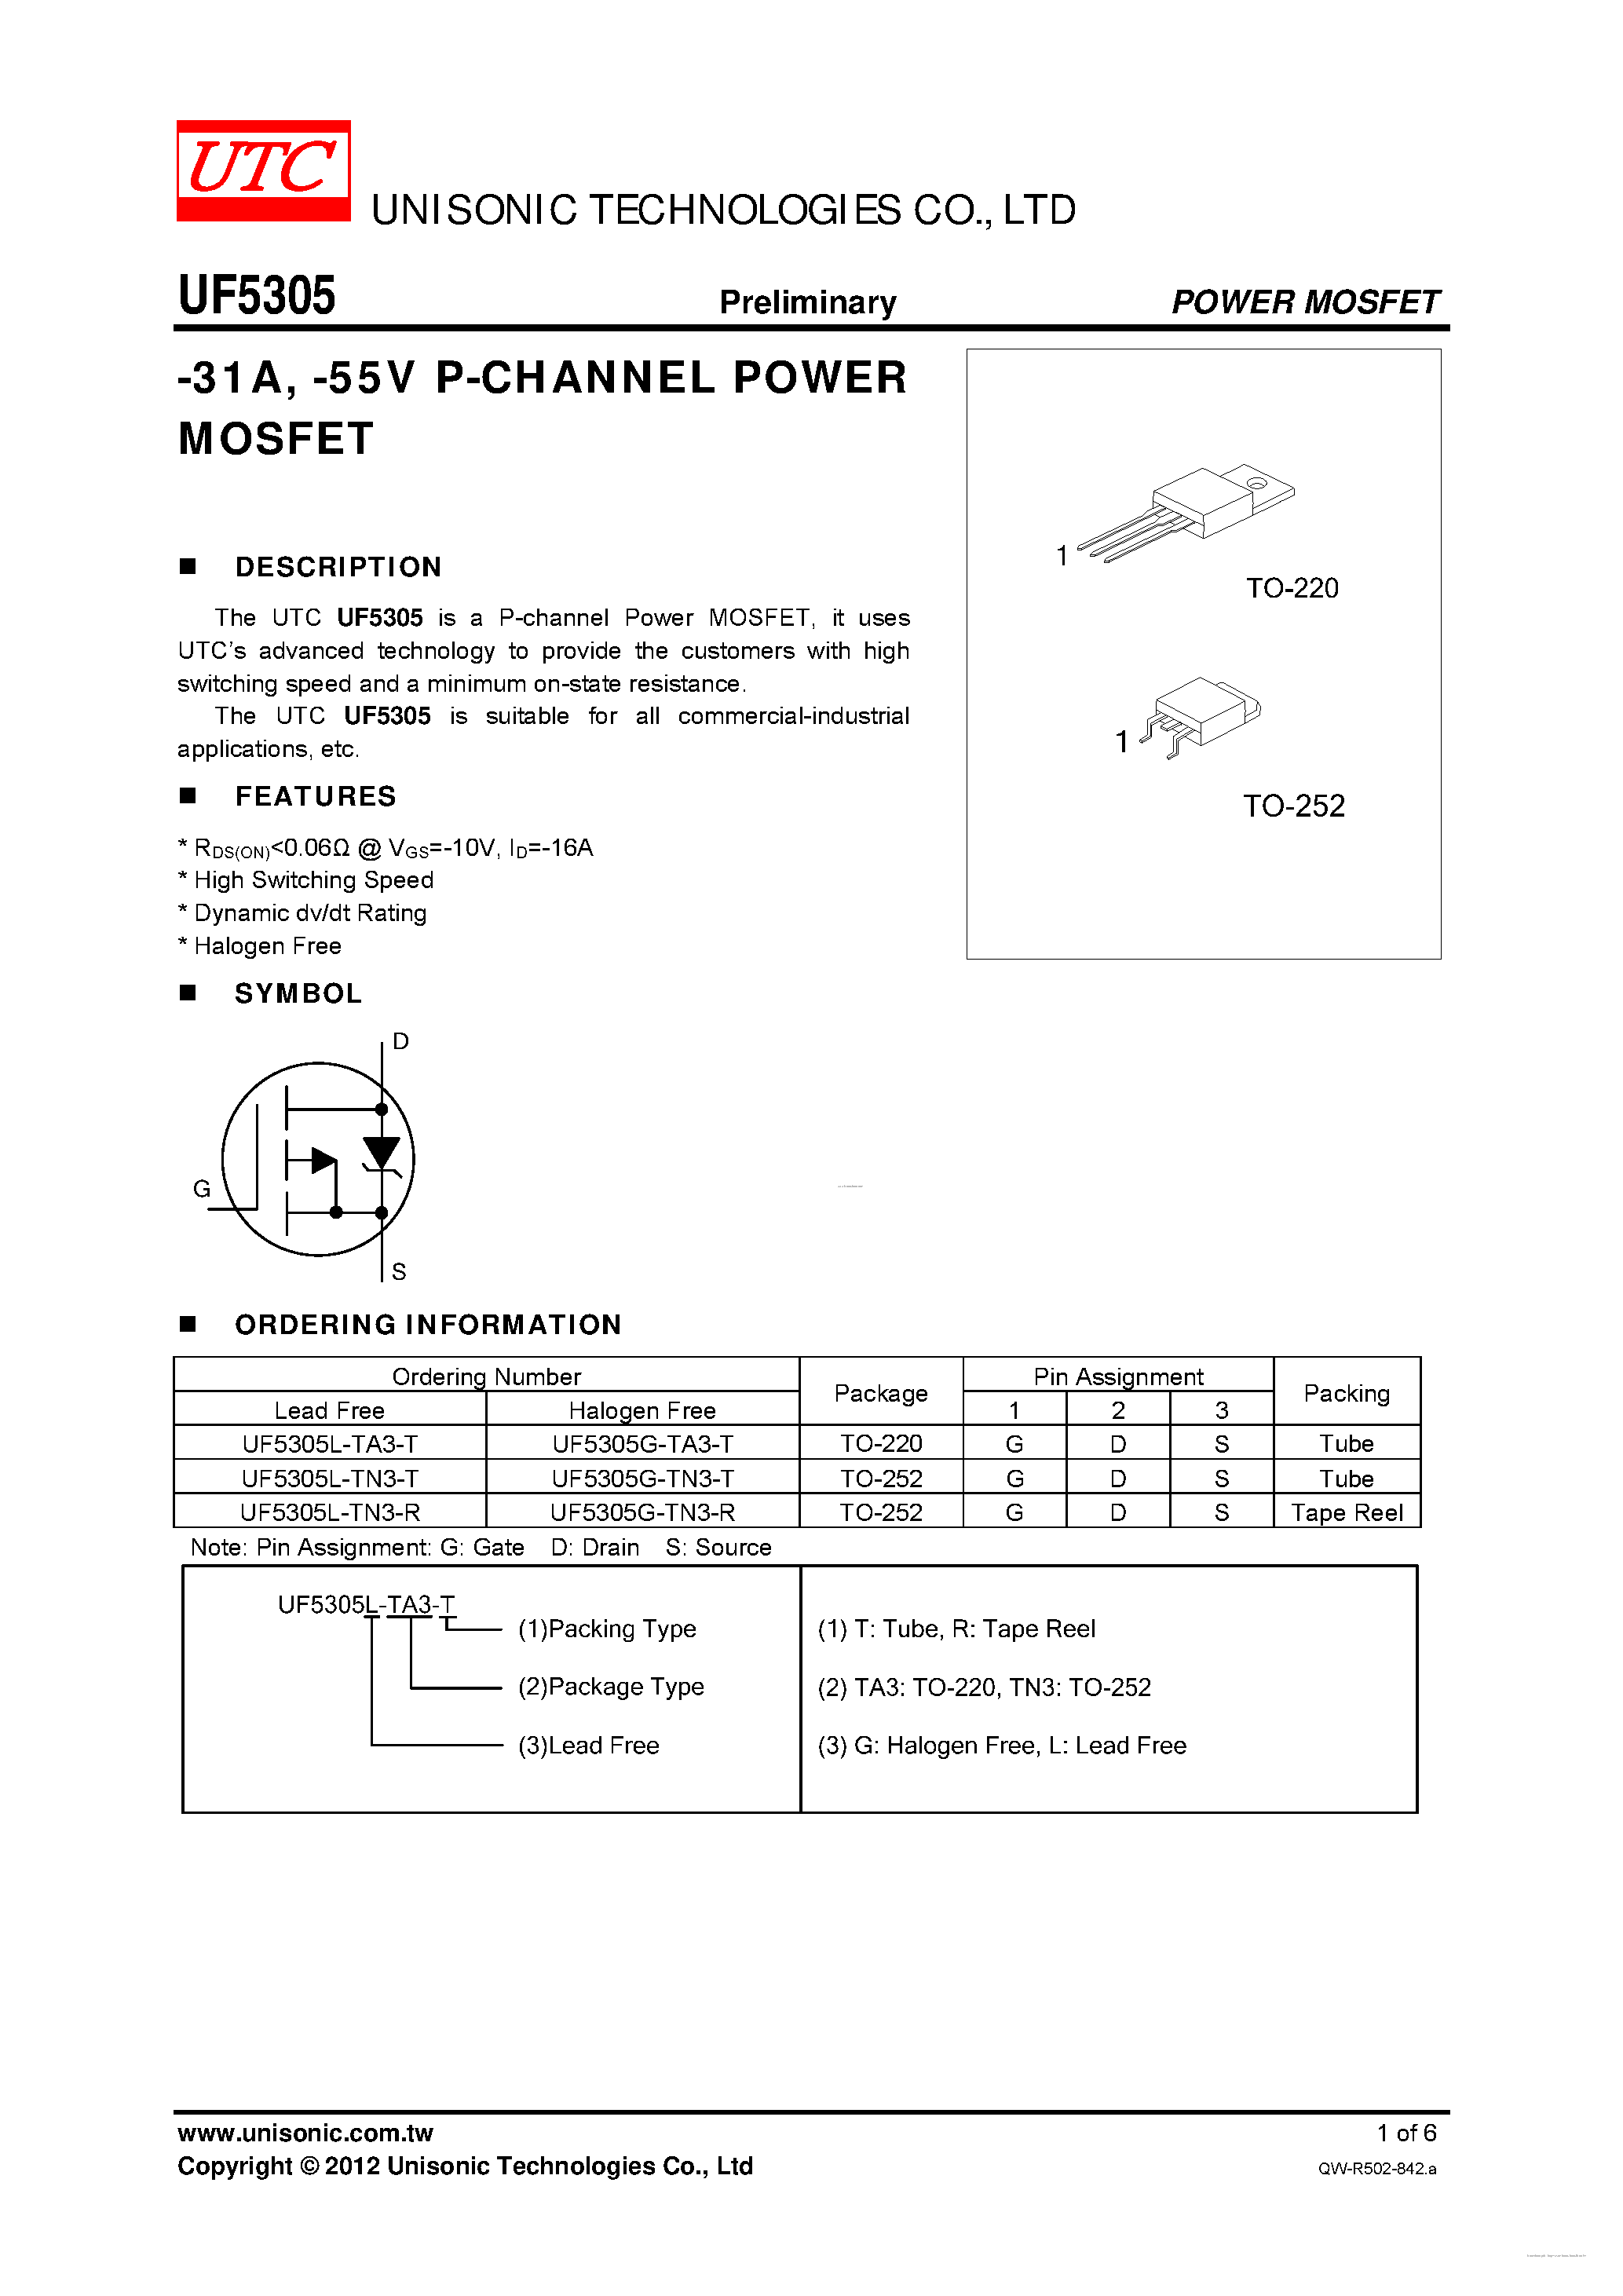 Даташит UF5305 - P-CHANNEL POWER MOSFET страница 1